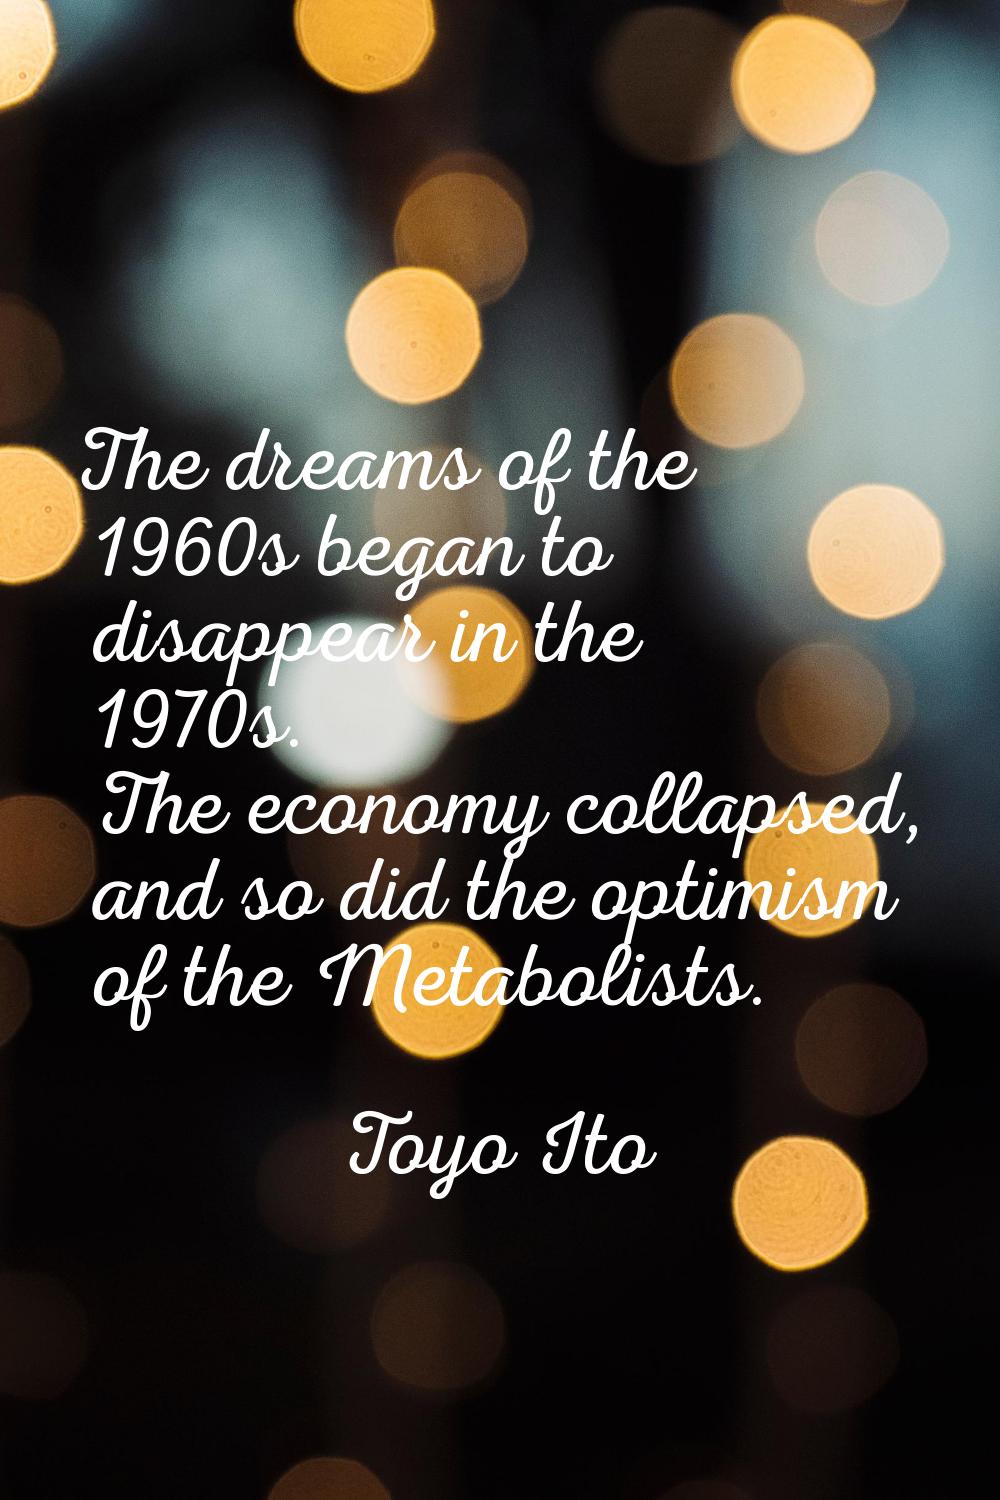 The dreams of the 1960s began to disappear in the 1970s. The economy collapsed, and so did the opti